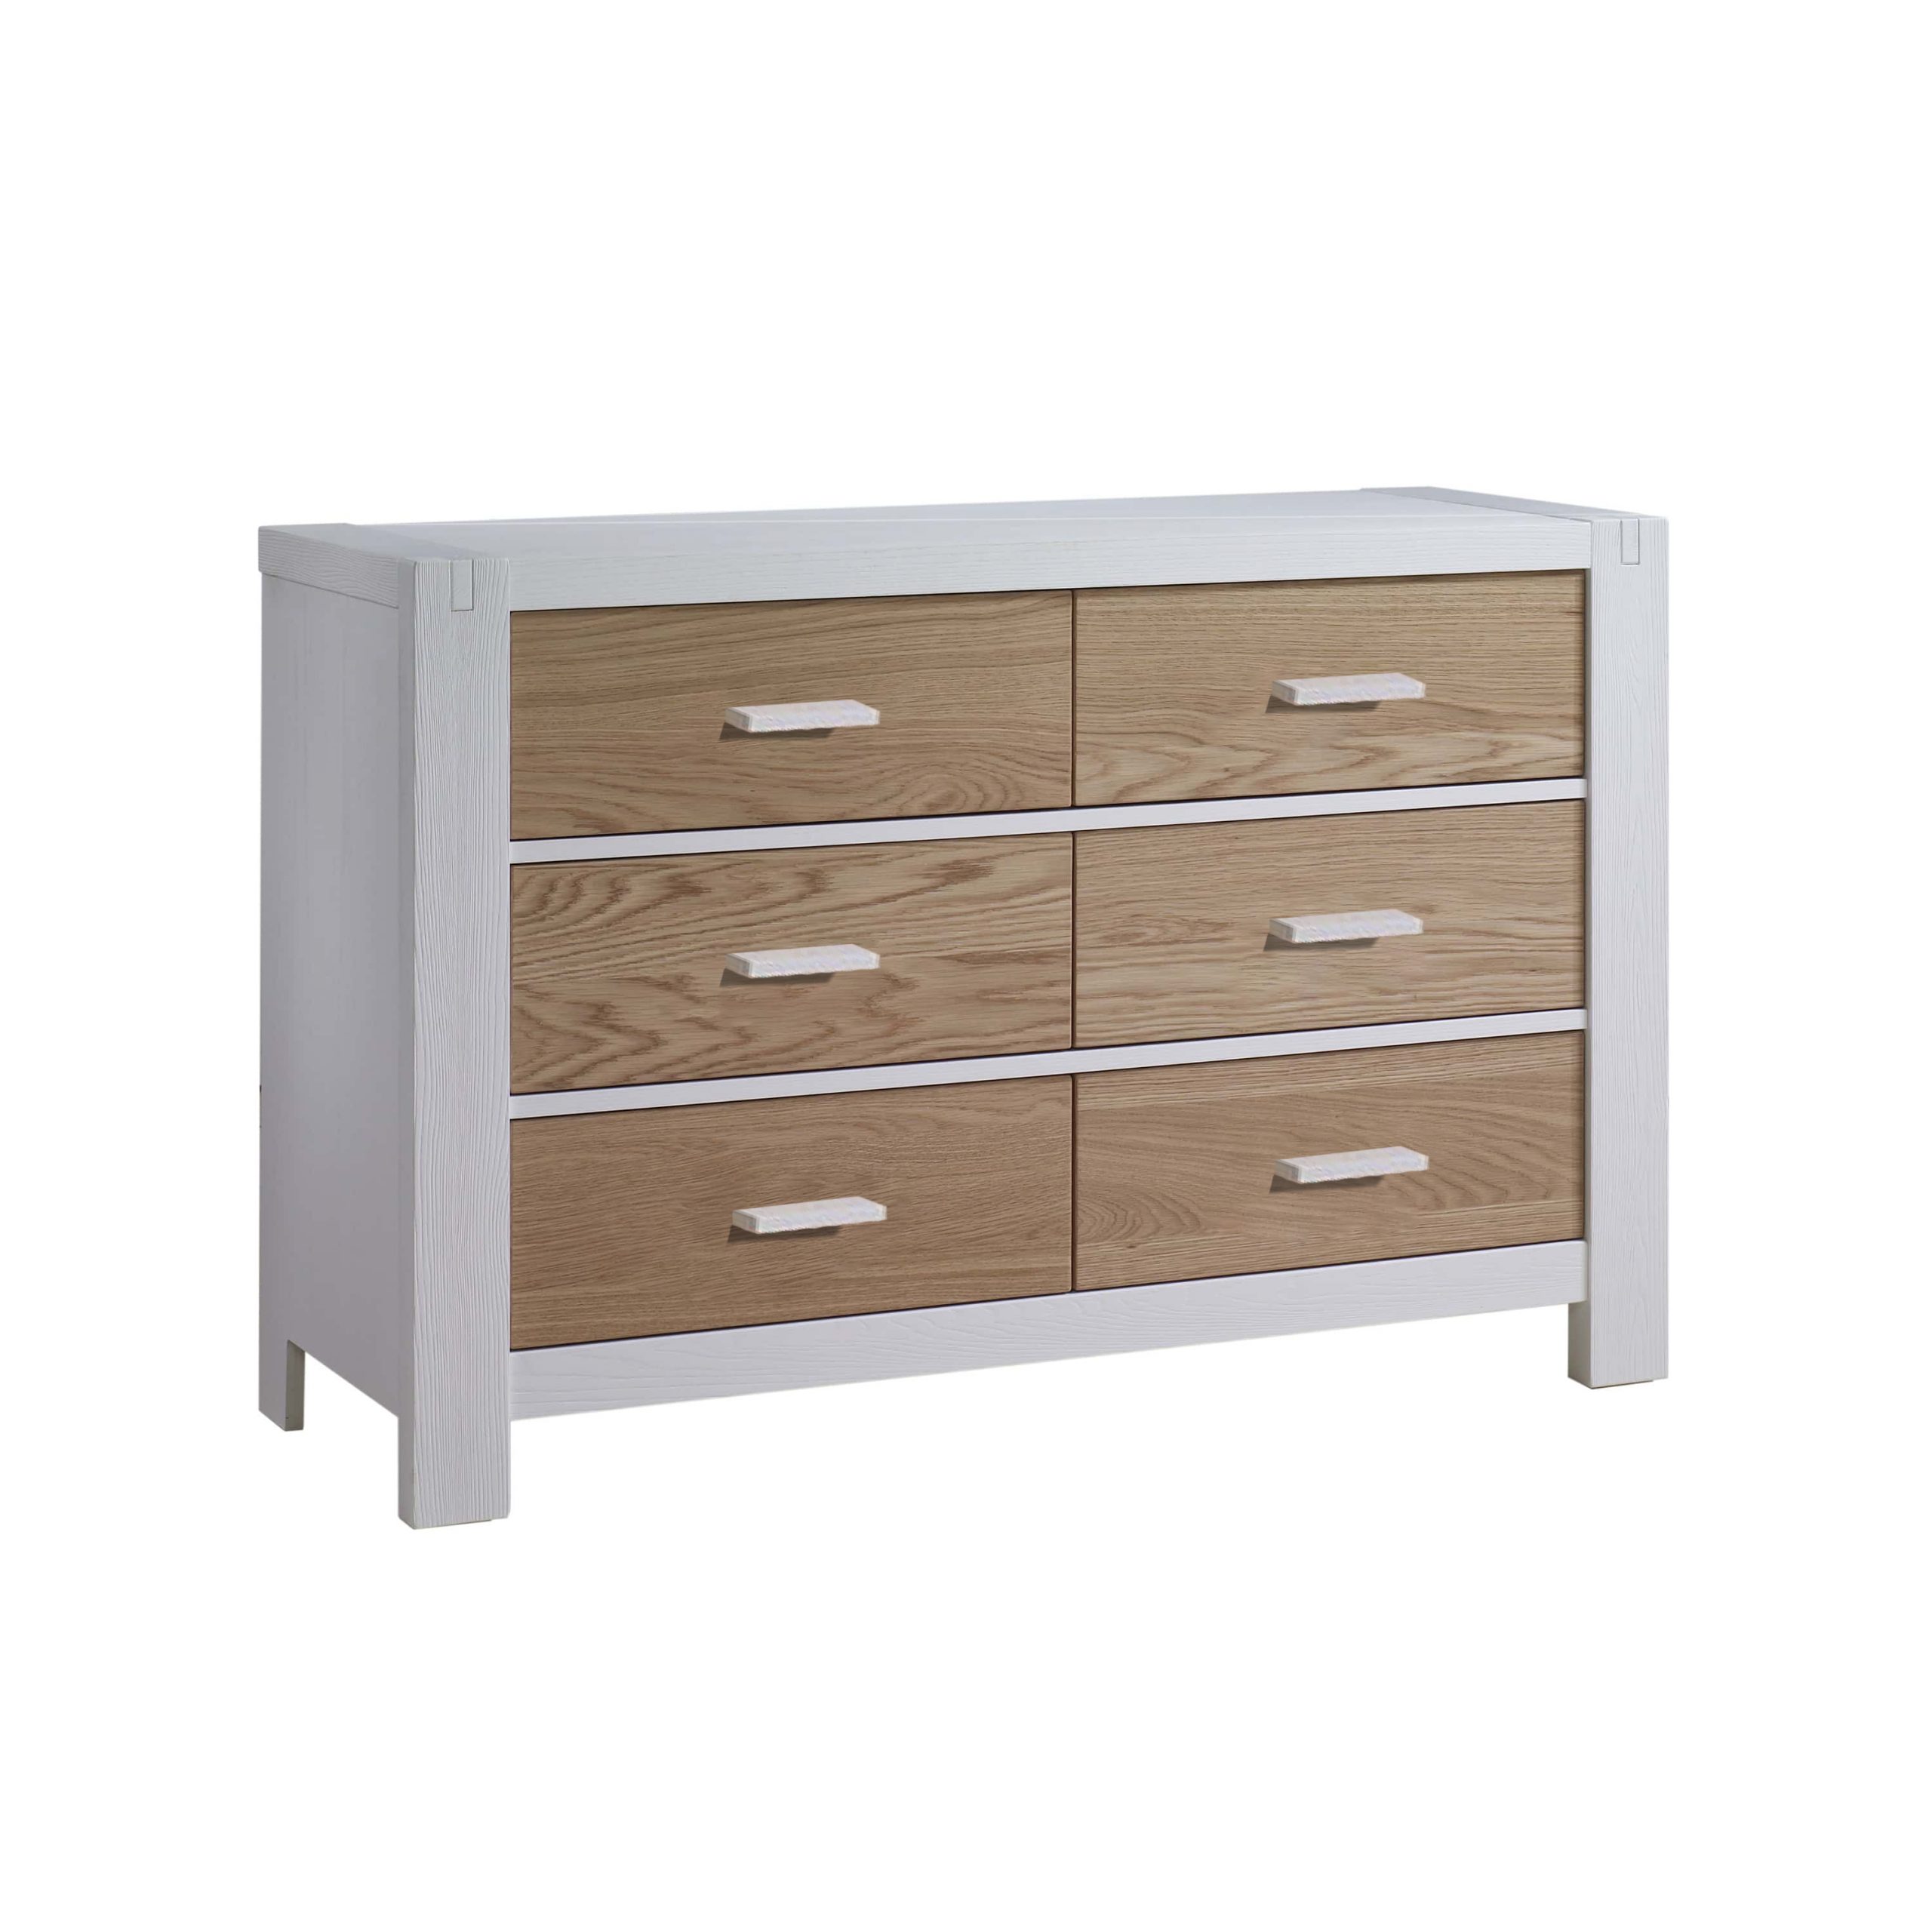 Rustico Moderno Double Dresser in White and Natural Oak